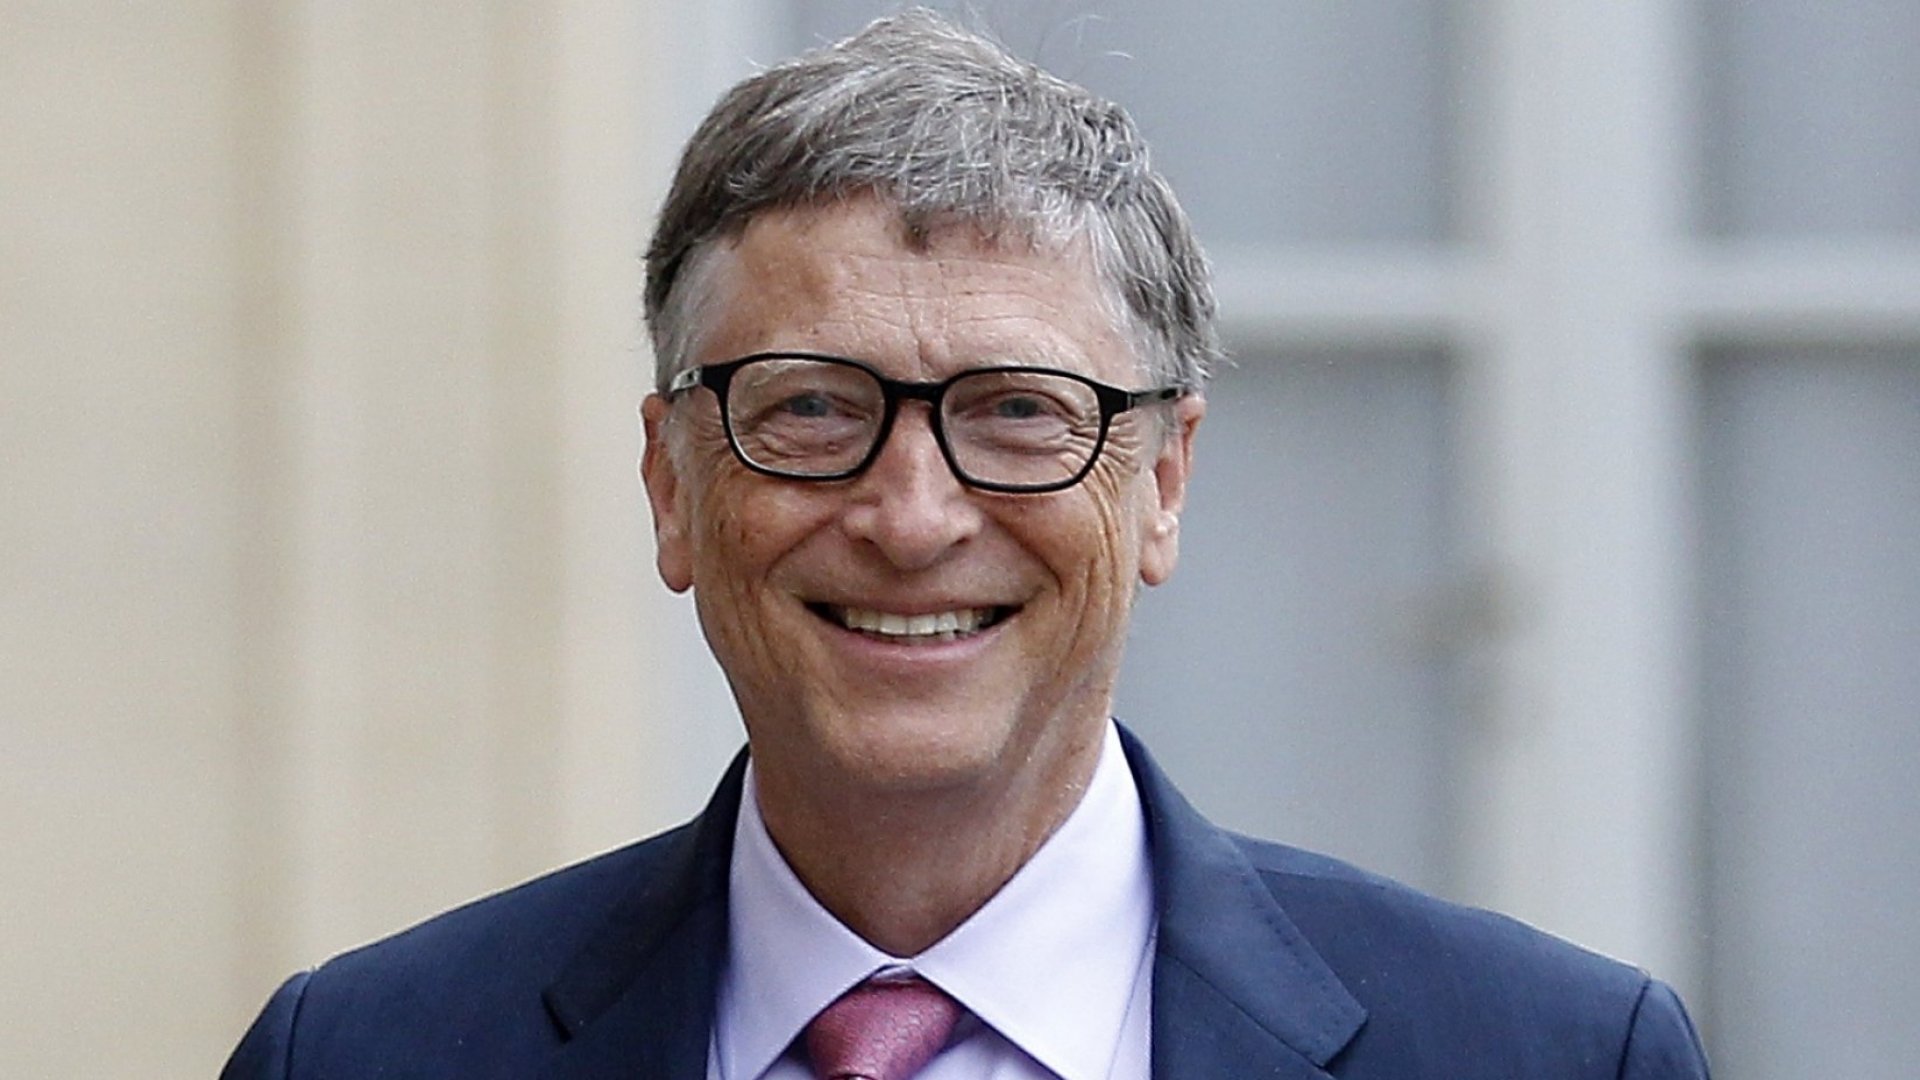 Bill Gates, the co-Founder of the Microsoft company and co-Founder of the Bill and Melinda Gates Foundation Getty Images 